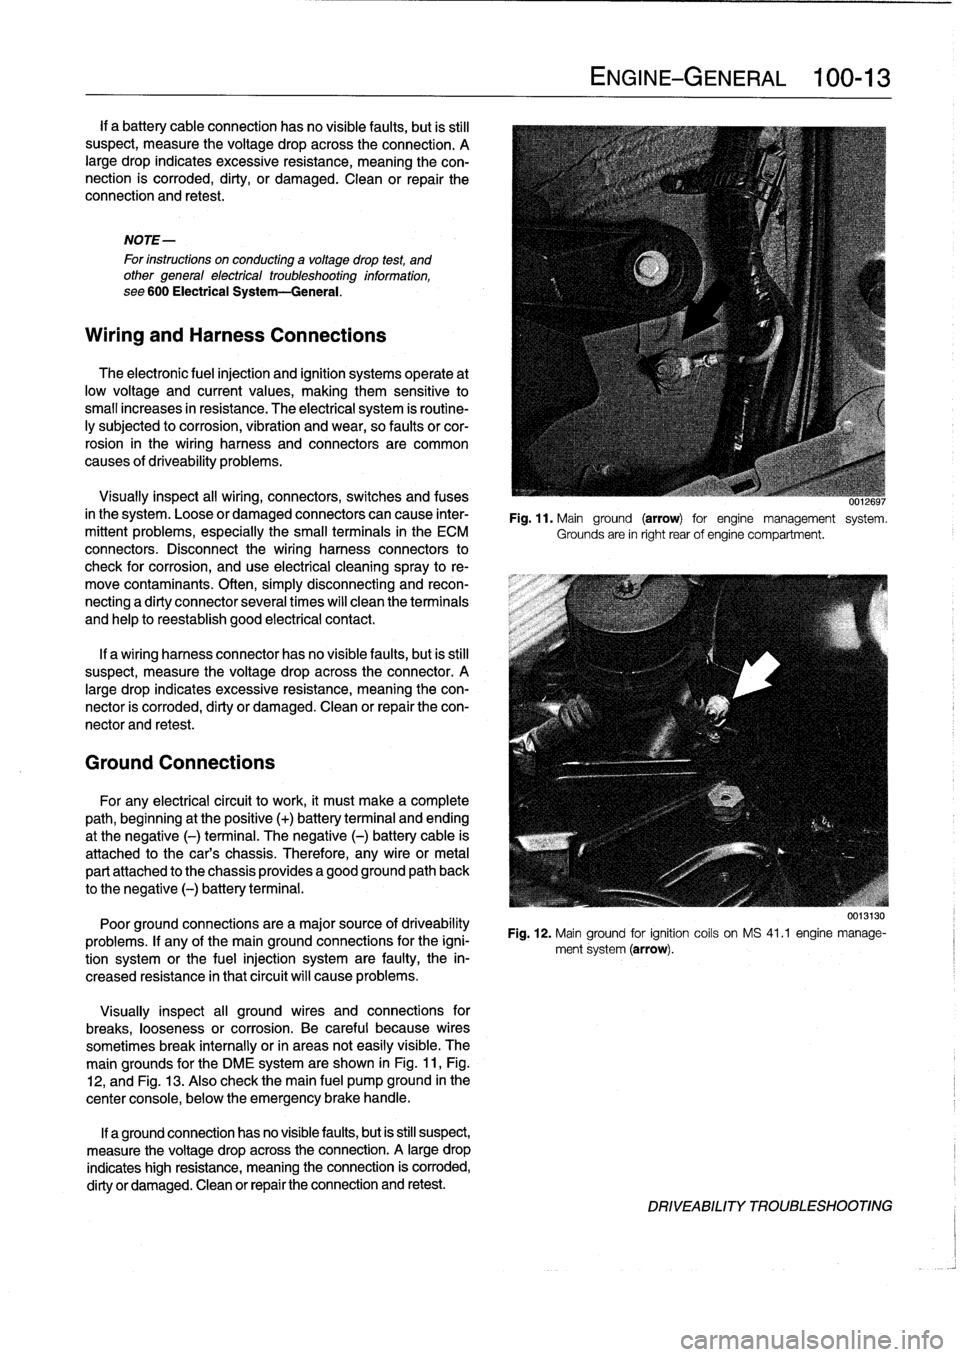 BMW M3 1996 E36 Workshop Manual 
If
a
battery
cableconnection
hasno
visible
faults,
but
is
still
suspect,
measure
the
voltage
drop
across
the
connection
.
A
large
drop
indicates
excessive
resistance,
meaning
the
con-
nection
is
corr